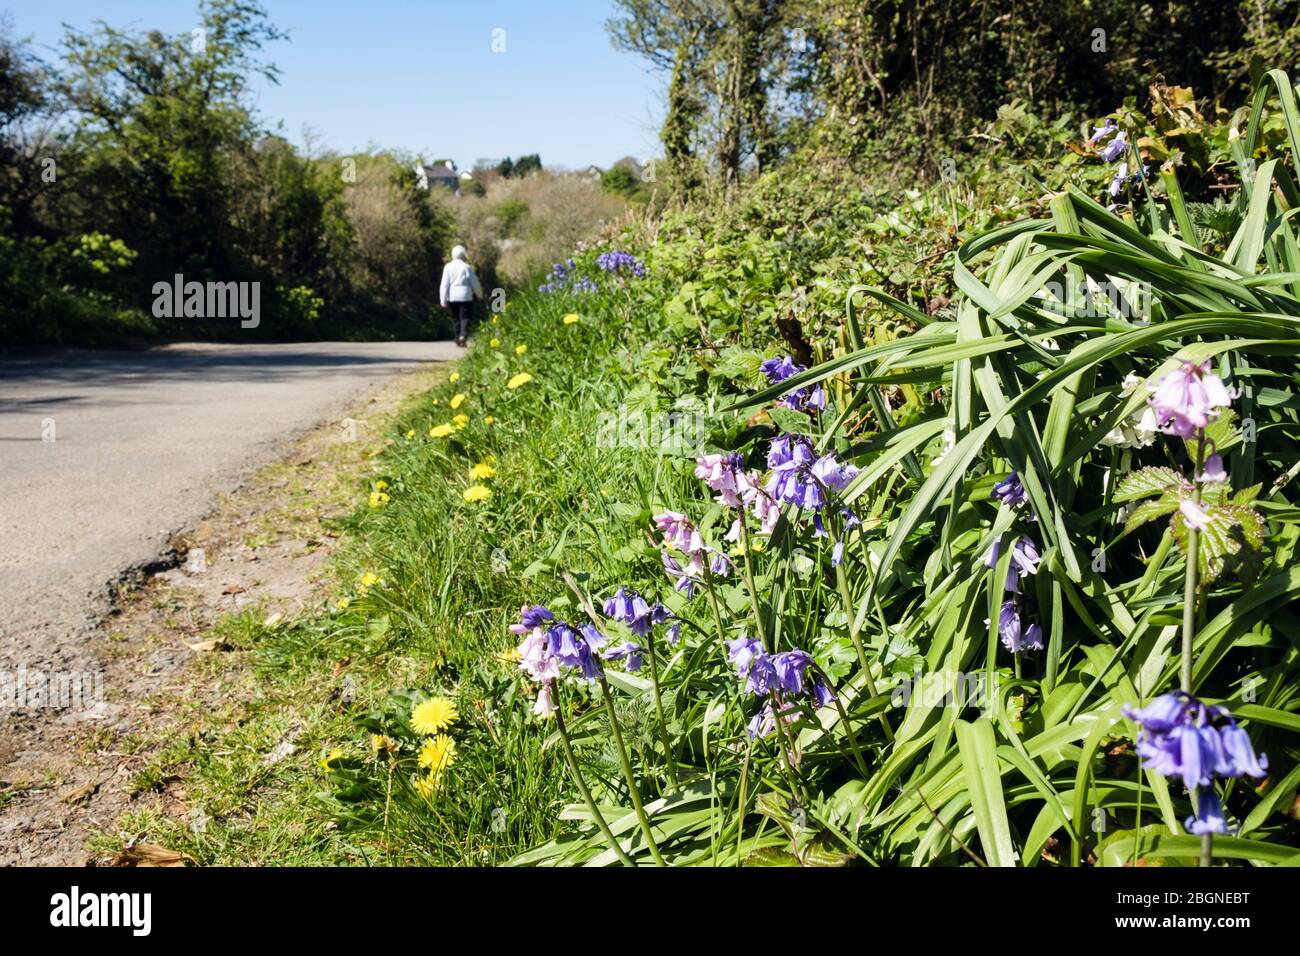 Country lane with wildflowers flowering on a grass verge and a person walking on quiet road in spring. Benllech, Isle of Anglesey, north Wales, UK Stock Photo